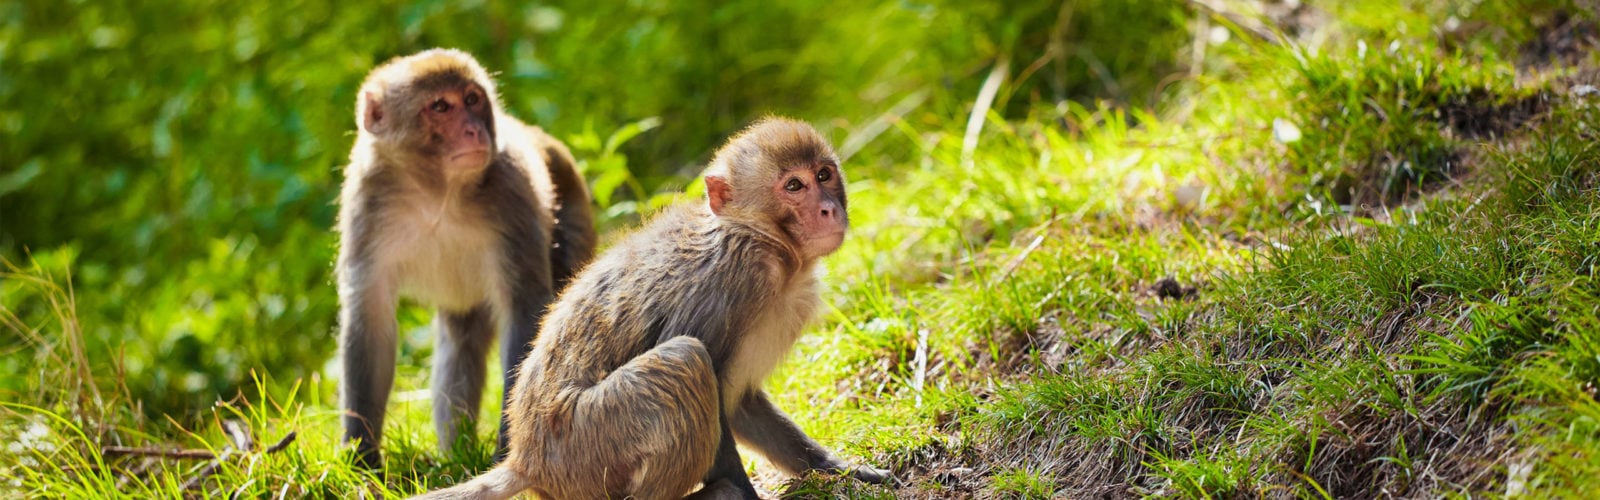 Rhesus macaques in India